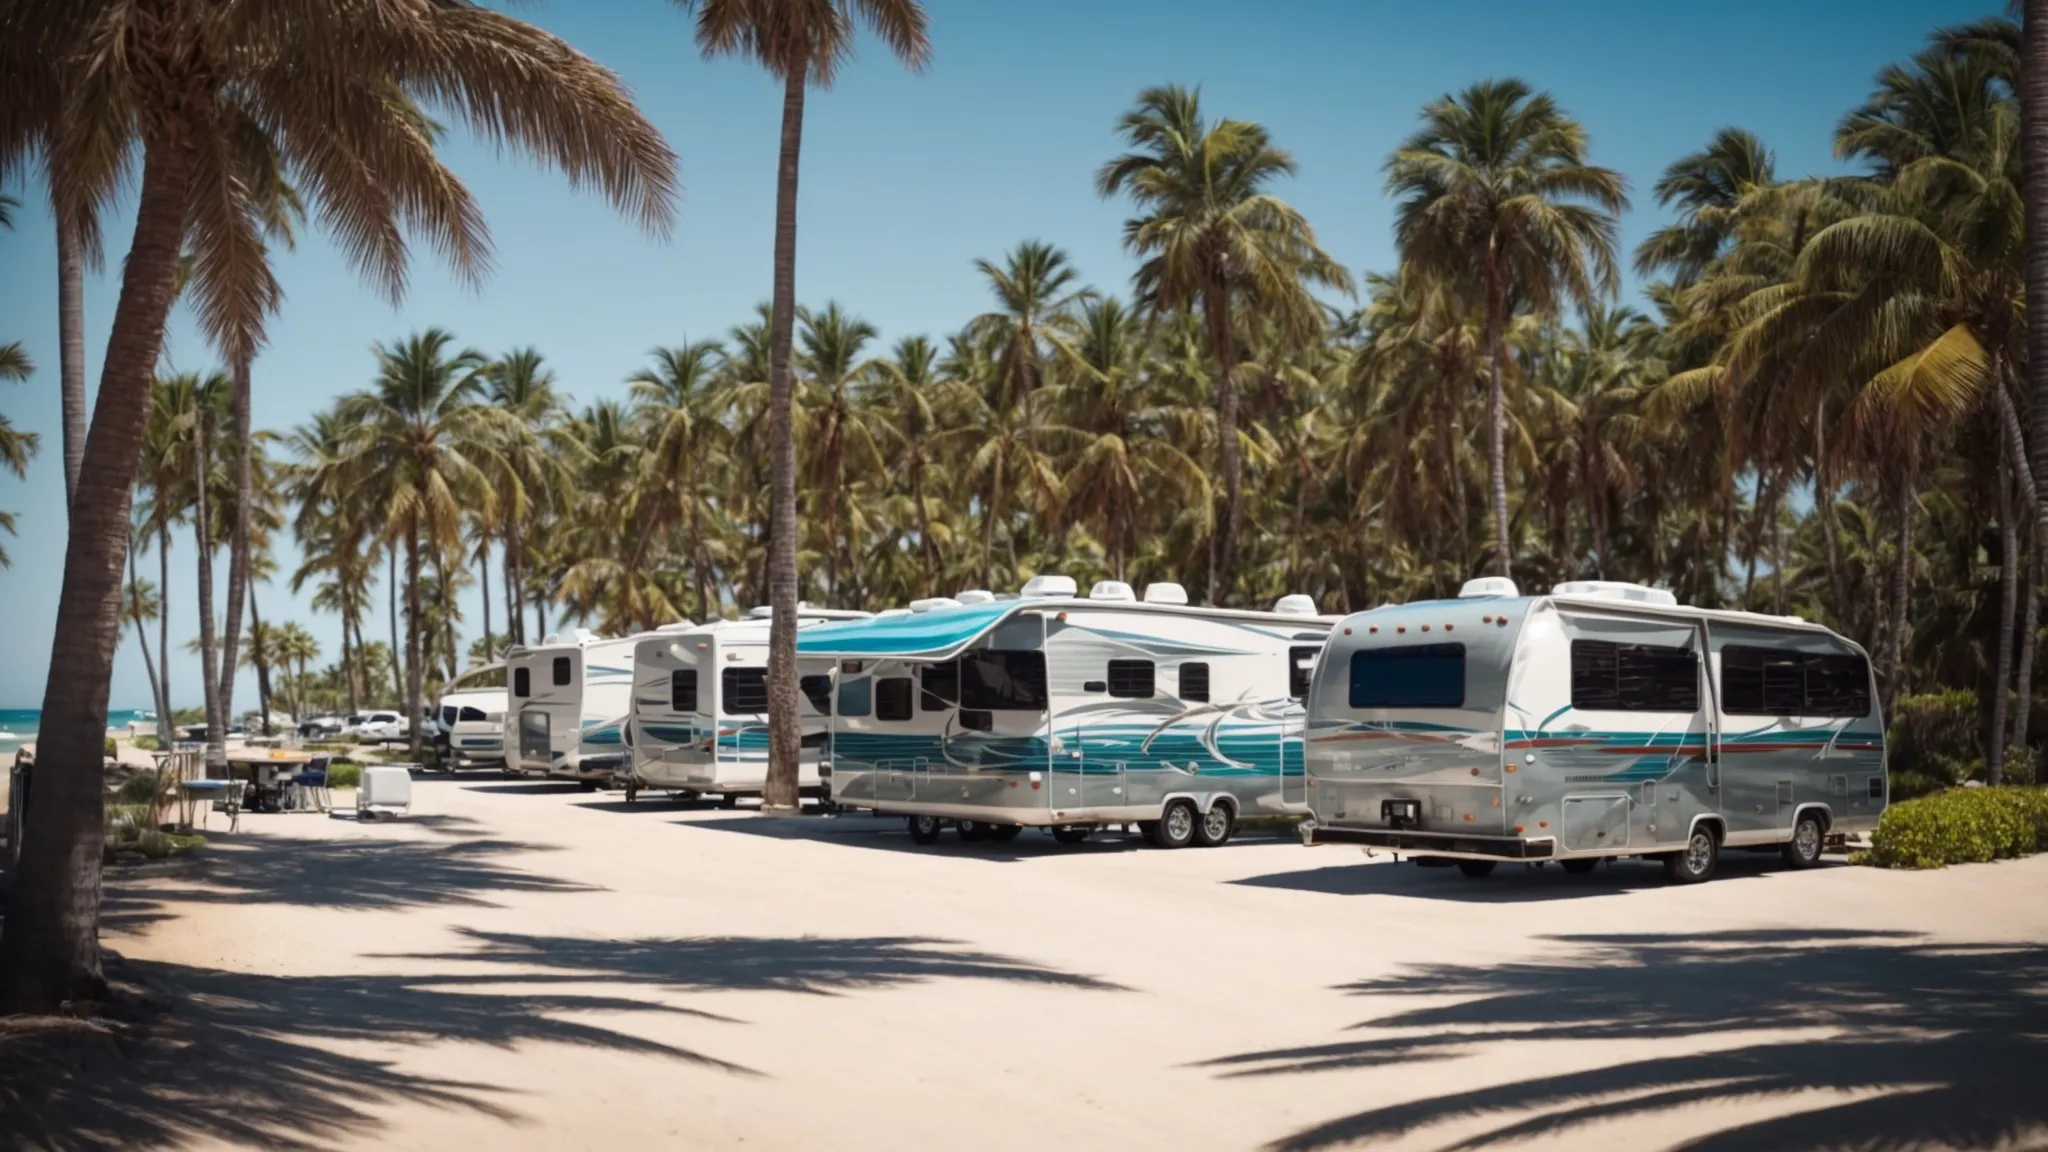 a scenic rv park with numerous parked rvs amidst palm trees, close to a serene beachfront under a clear blue sky.